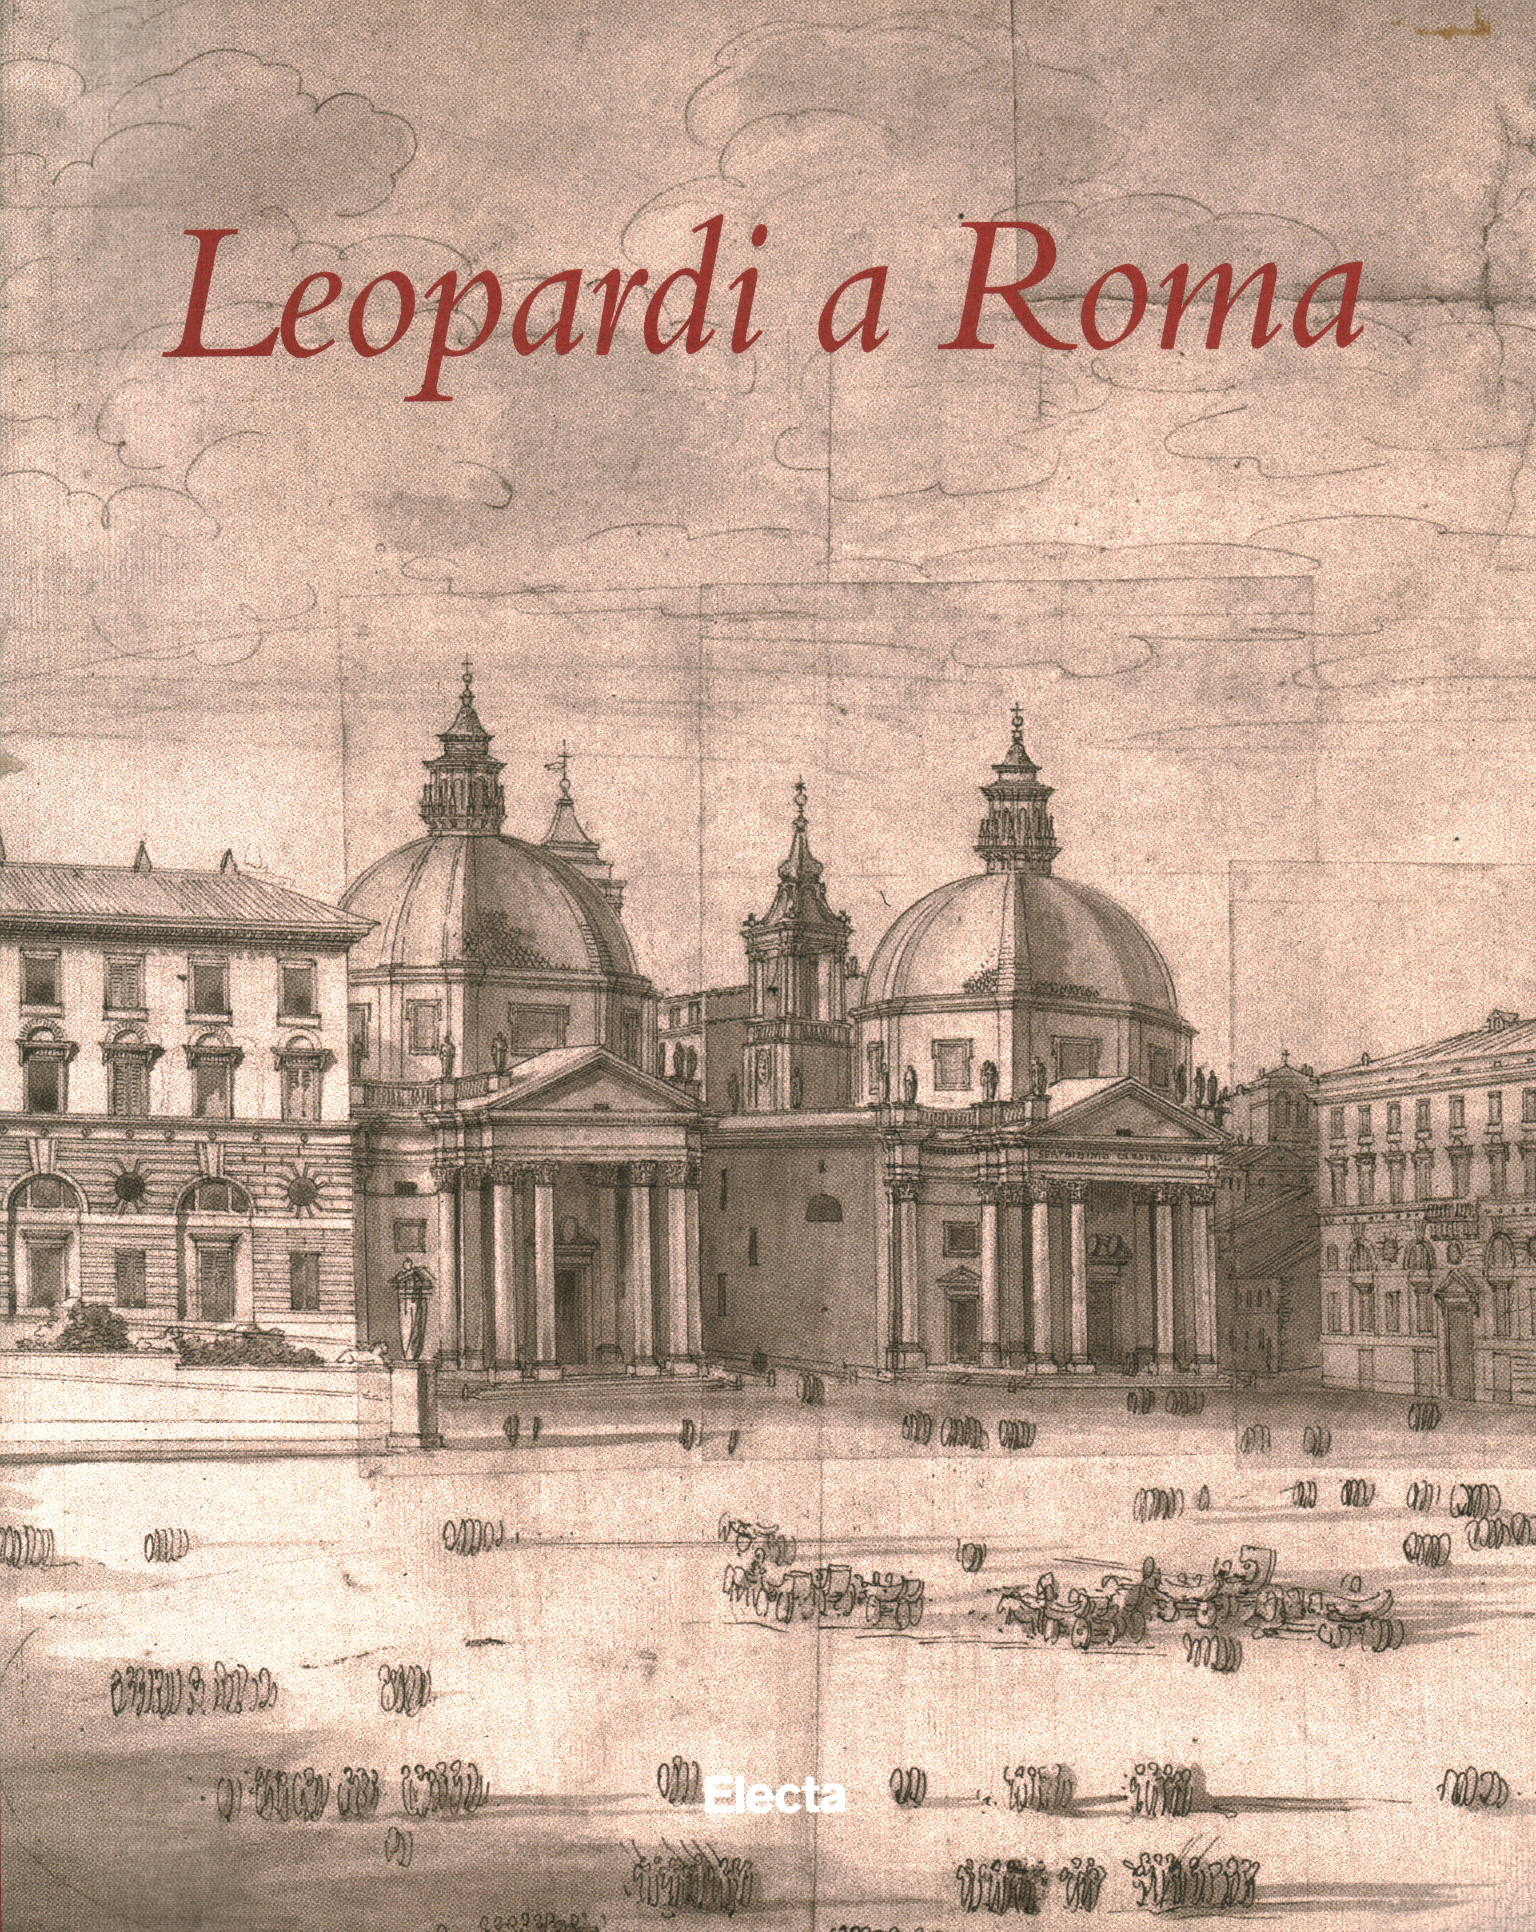 Leopards in Rome